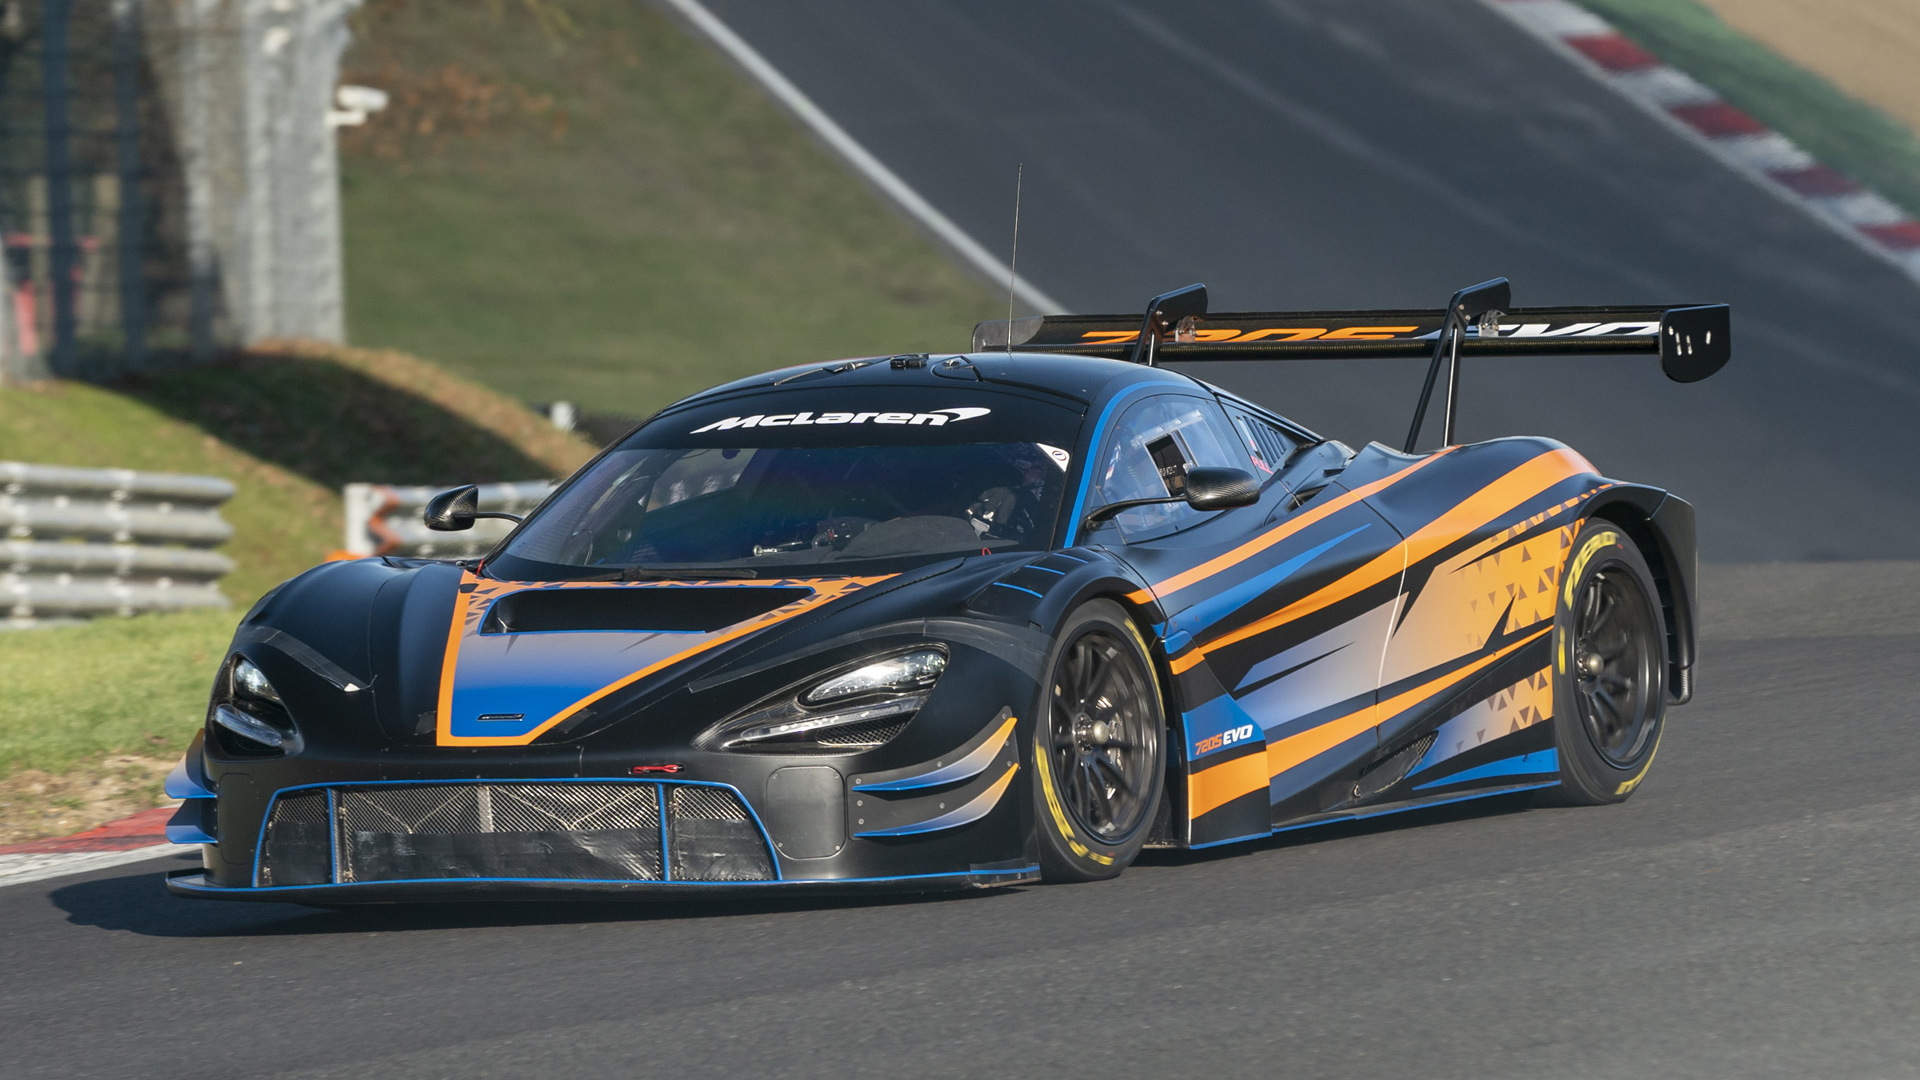 Front-angled view of the McLaren 720S GT3 Evo in race livery out on a race circuit.